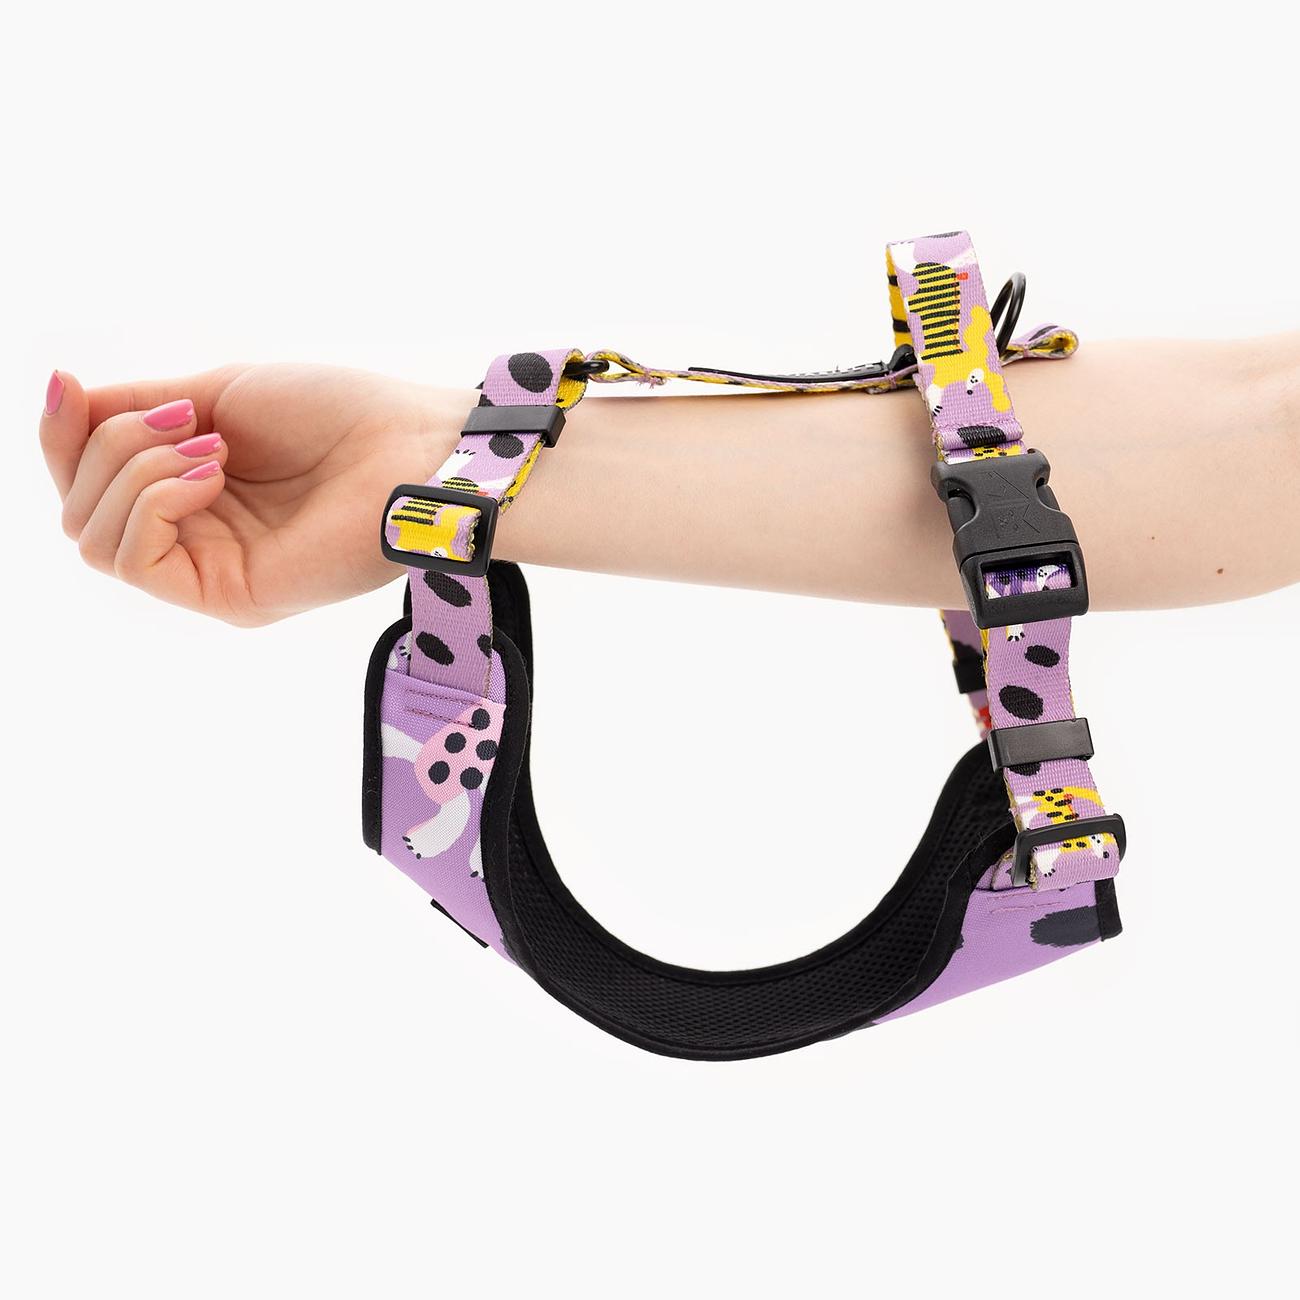 Stay-on pressure-free harness "Doggo in sheep's clothing"